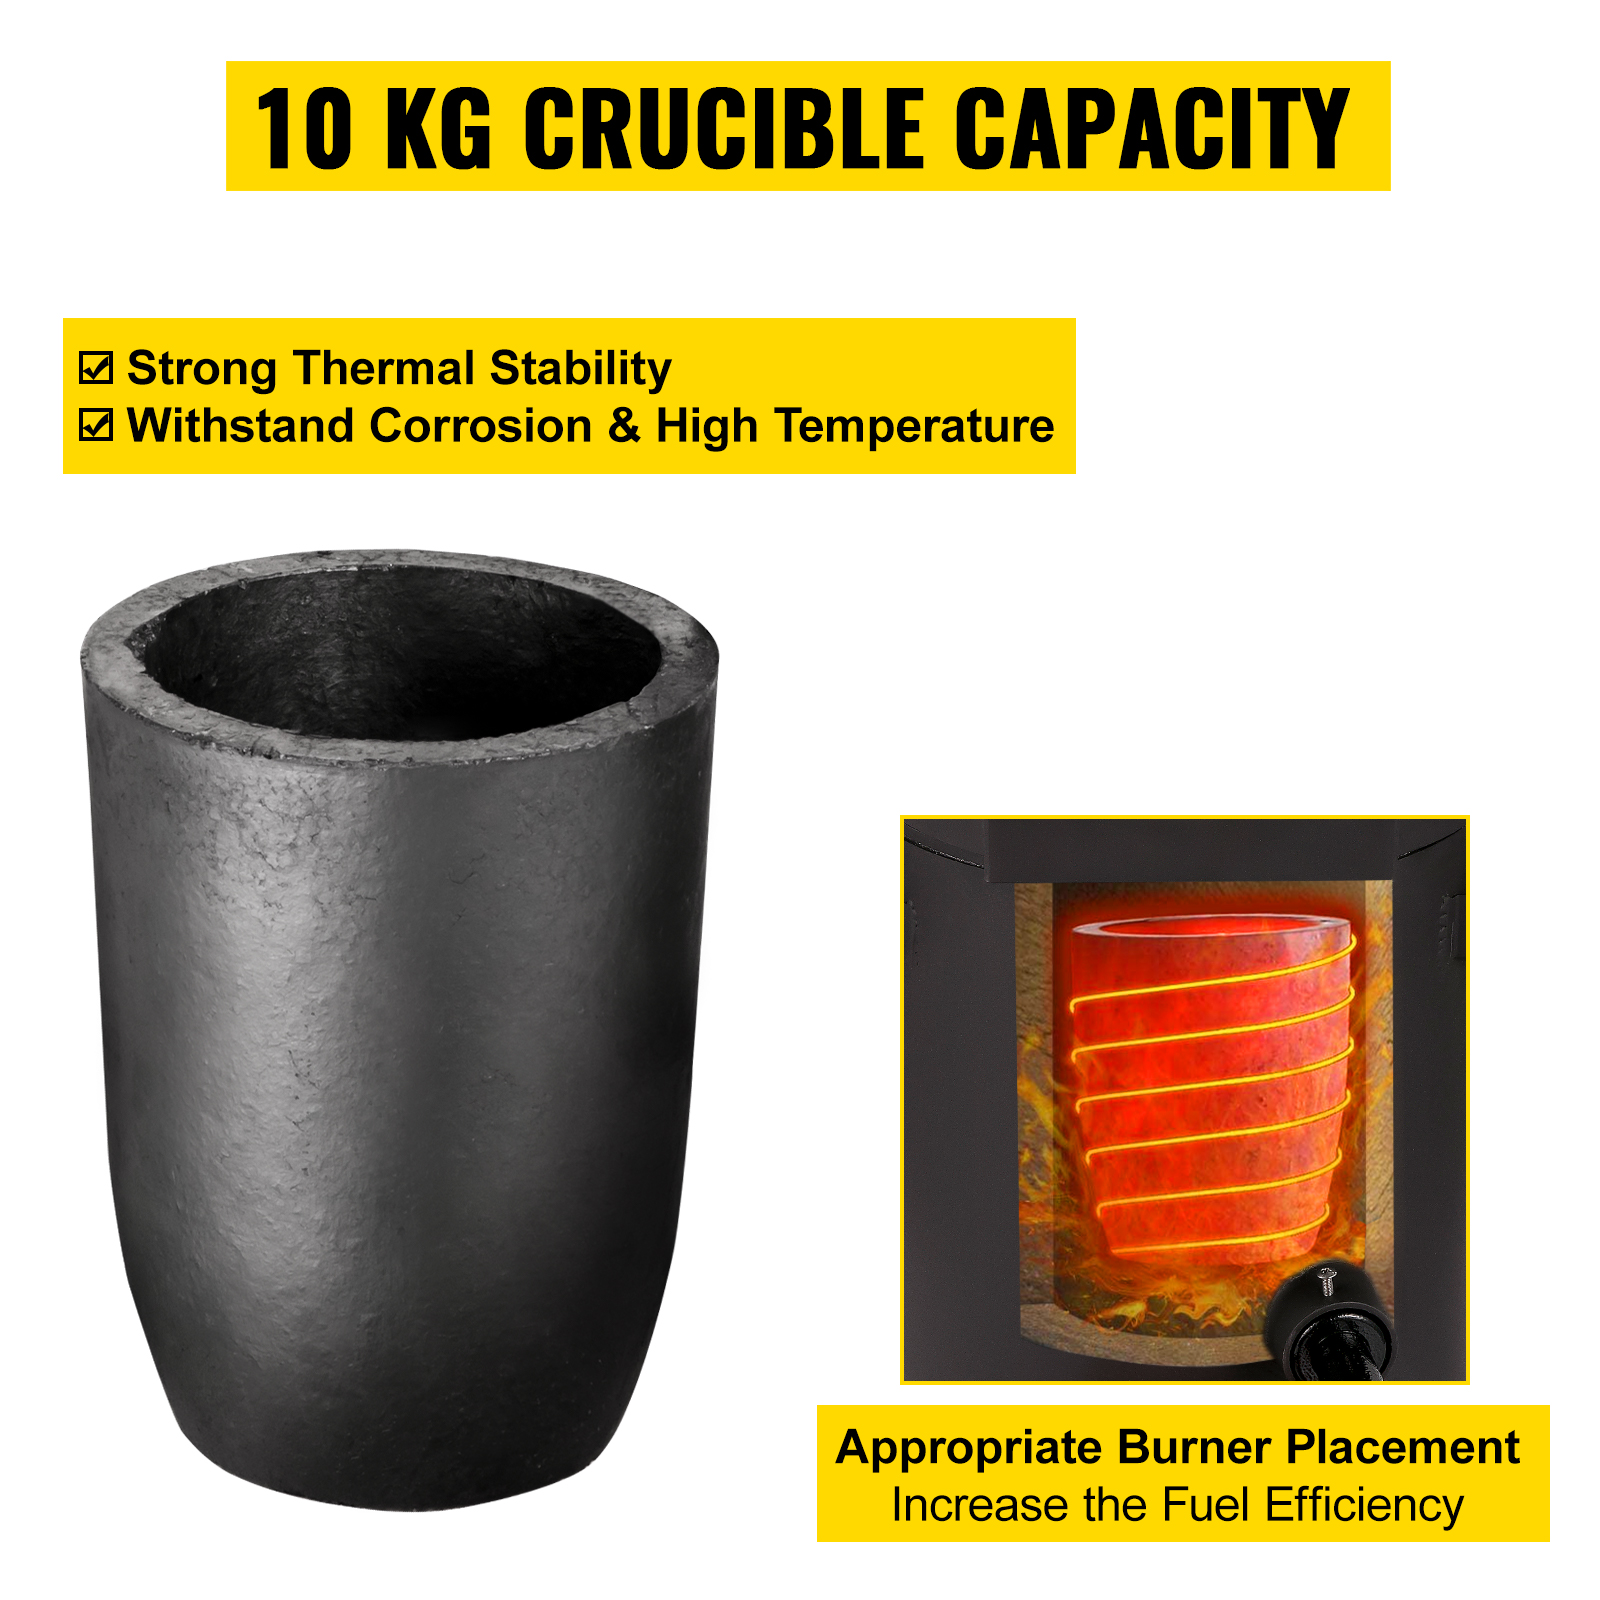 VEVOR High Purity Graphite Crucible, 3 kg Graphite Furnace, Double